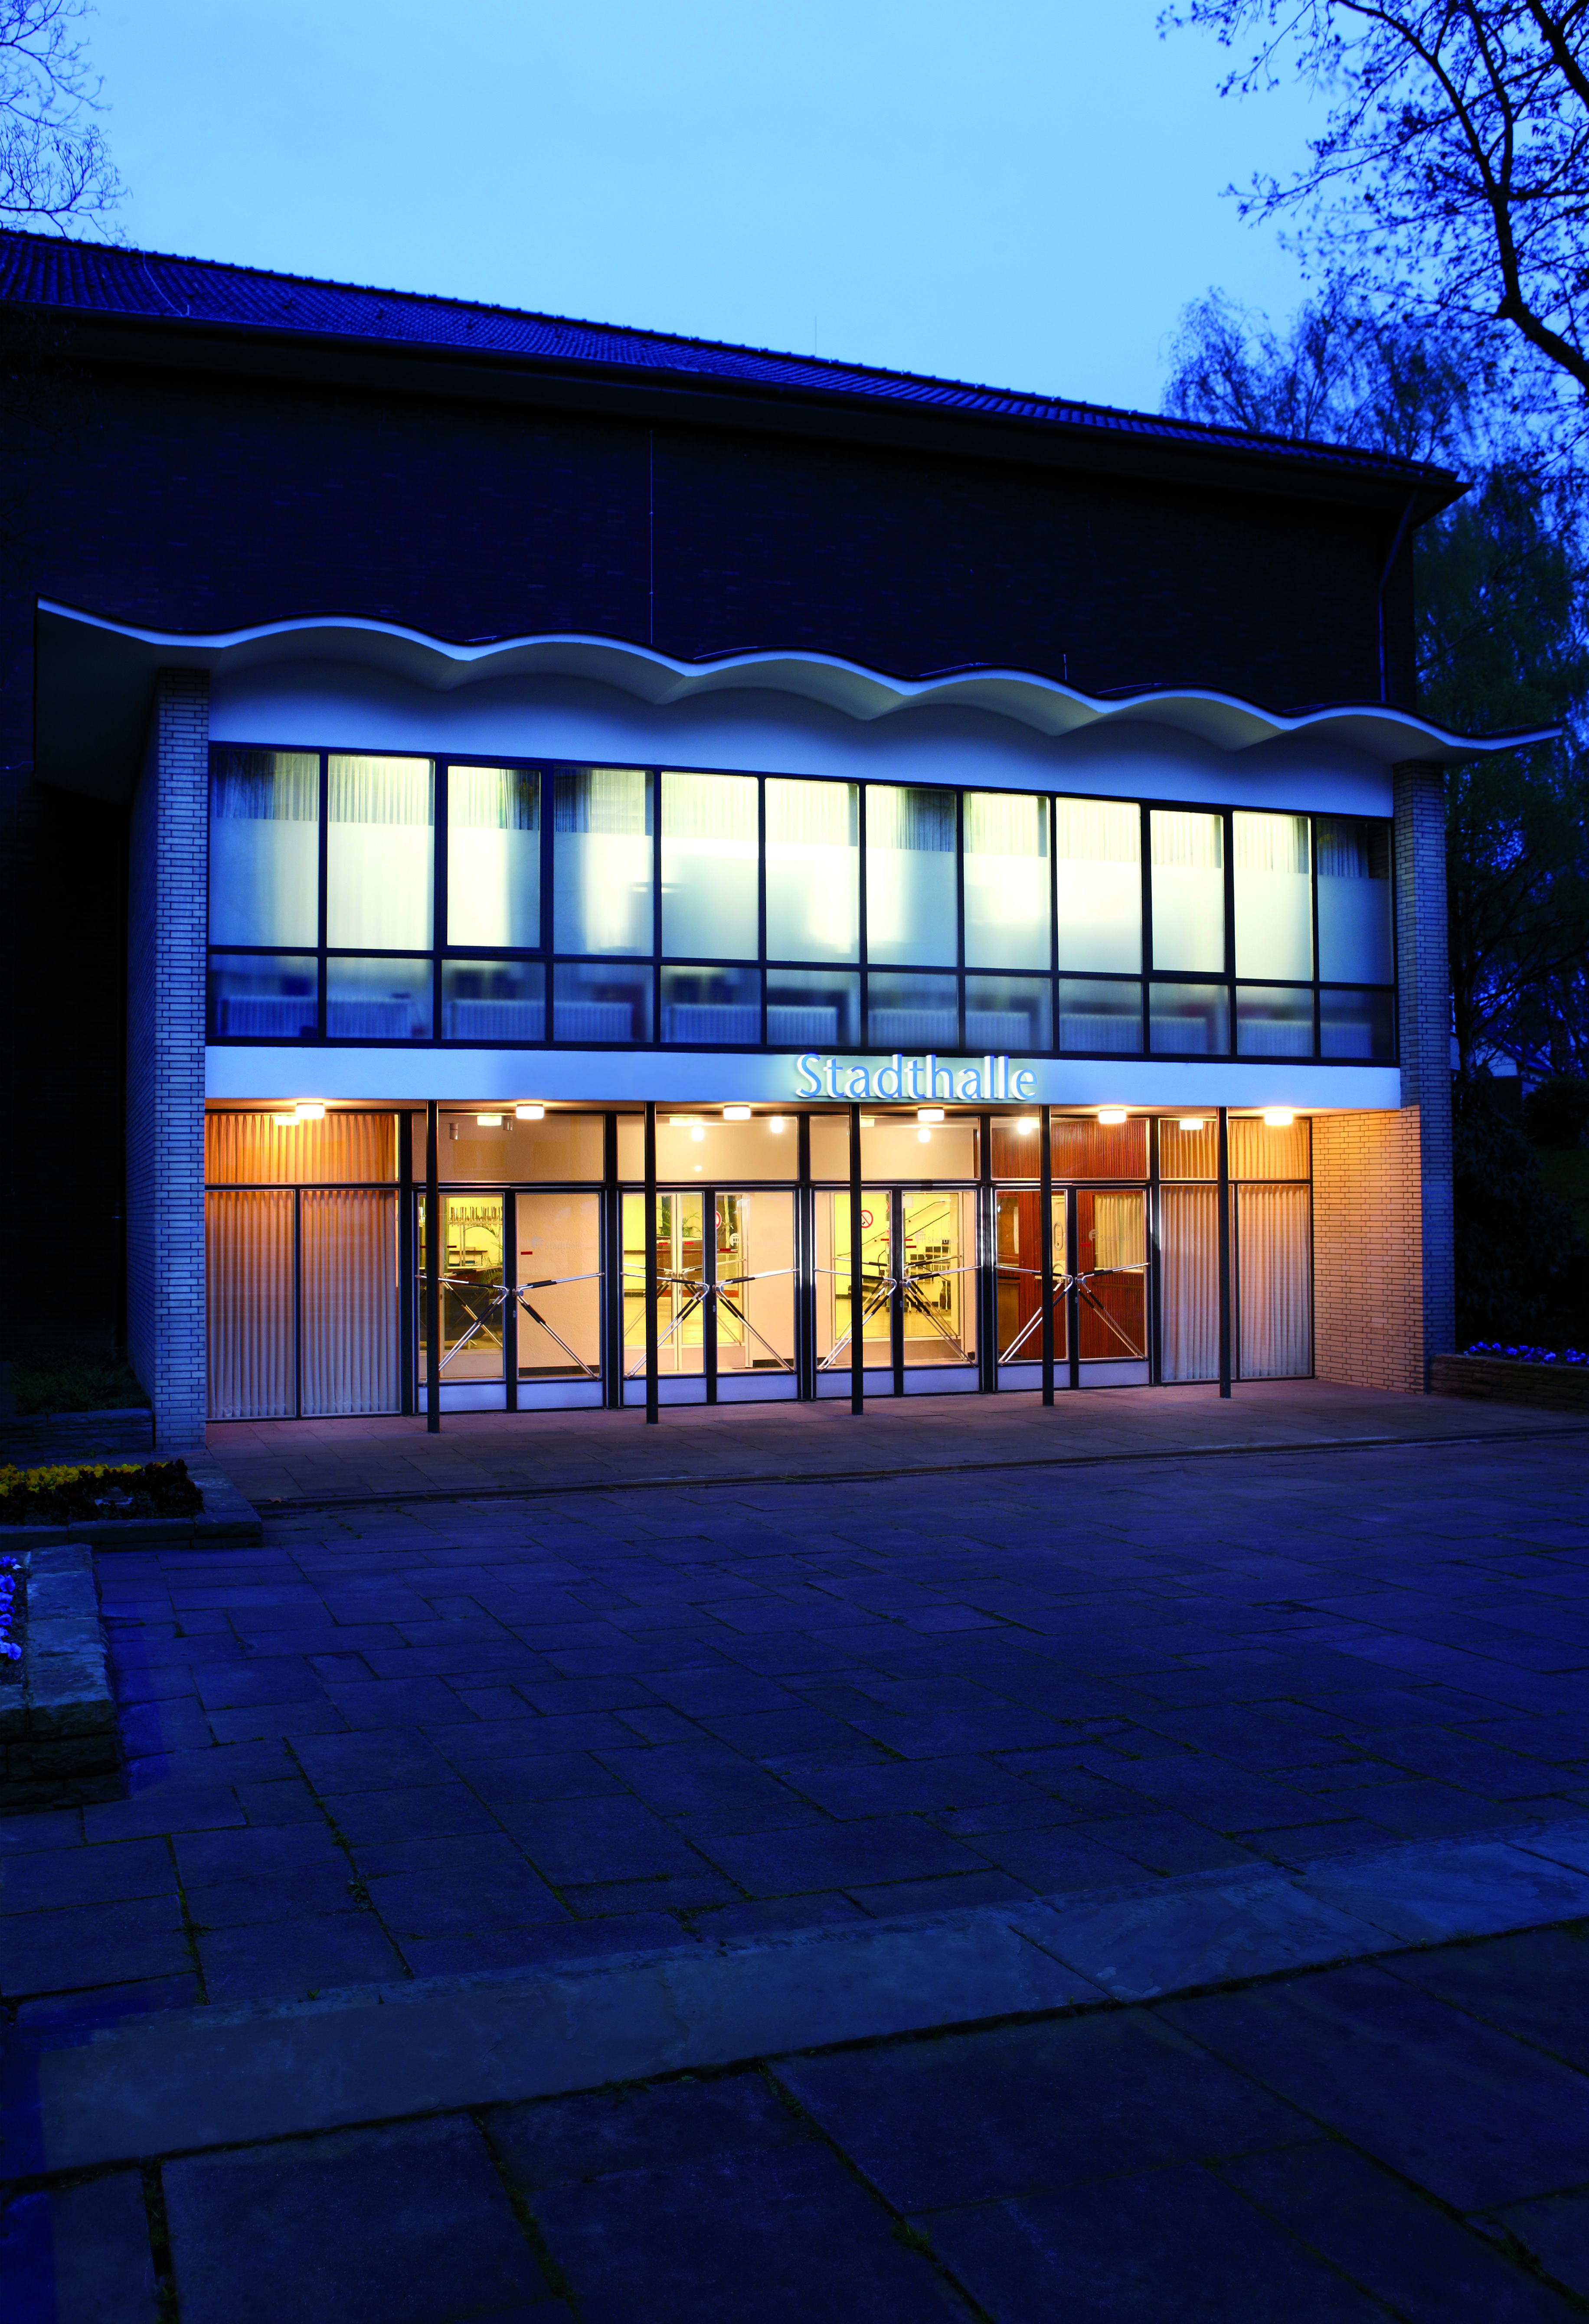 Exterior view of the illuminated main entrance of the Stadthalle Wattenscheid at the time of the blue hour.